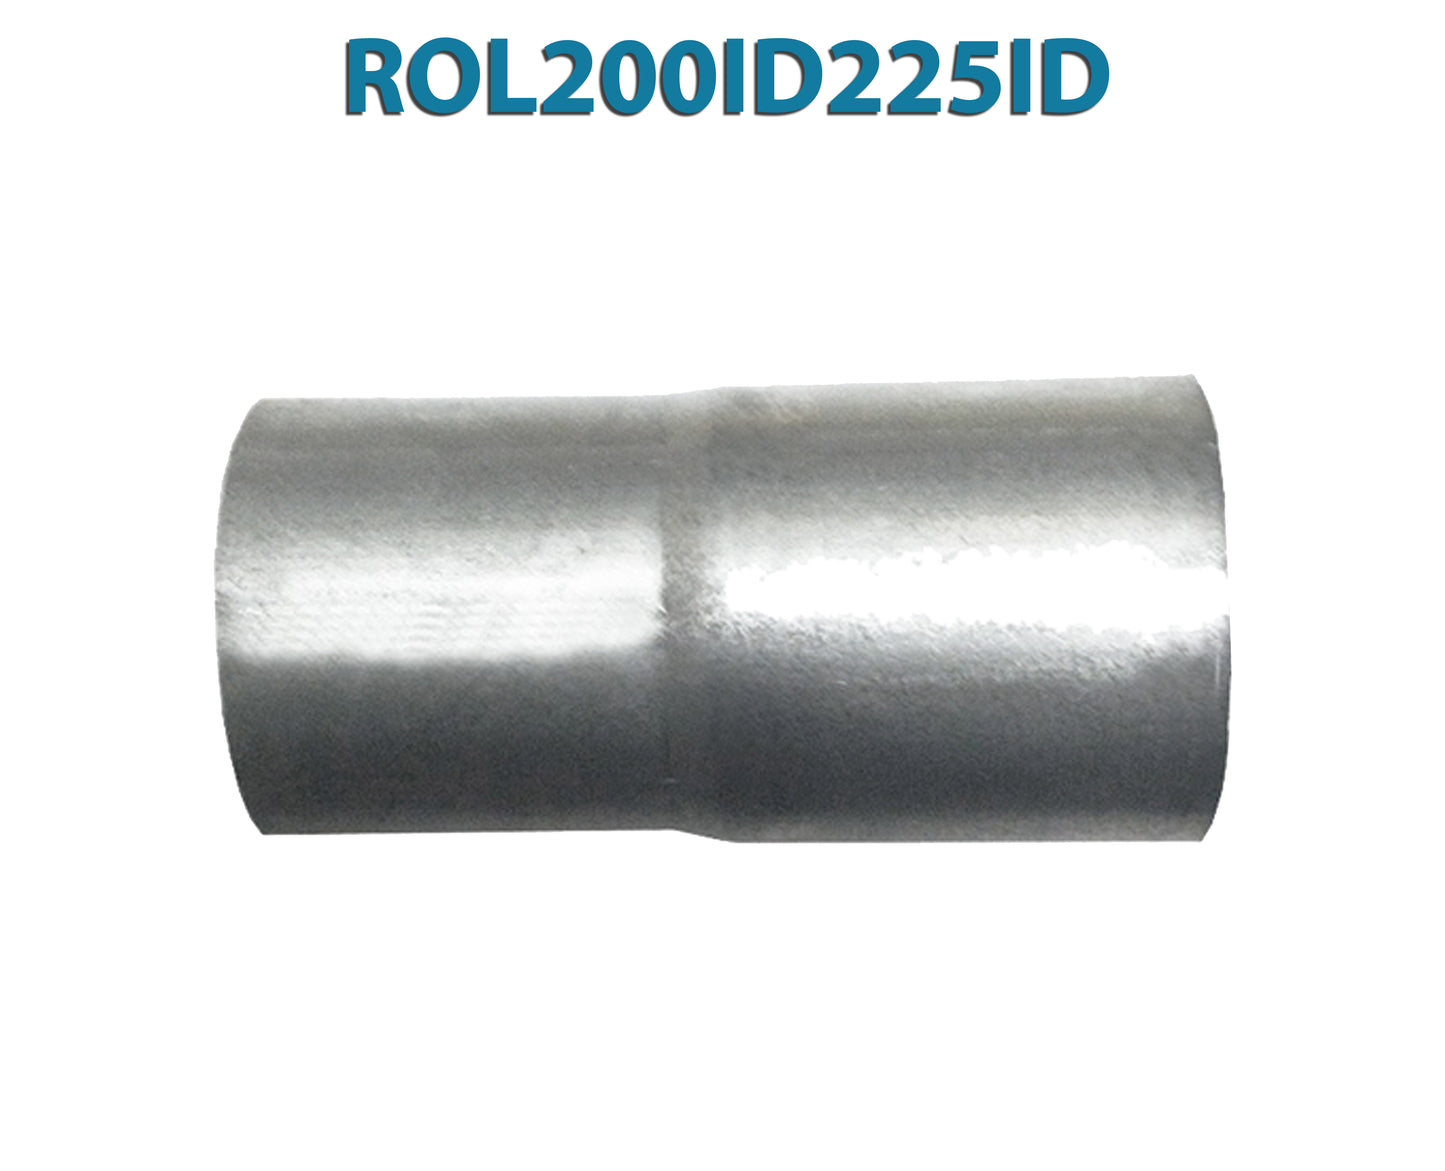 ROL200ID225ID 548545 2” ID to 2 1/4” ID Universal Exhaust Pipe to Pipe Adapter Reducer